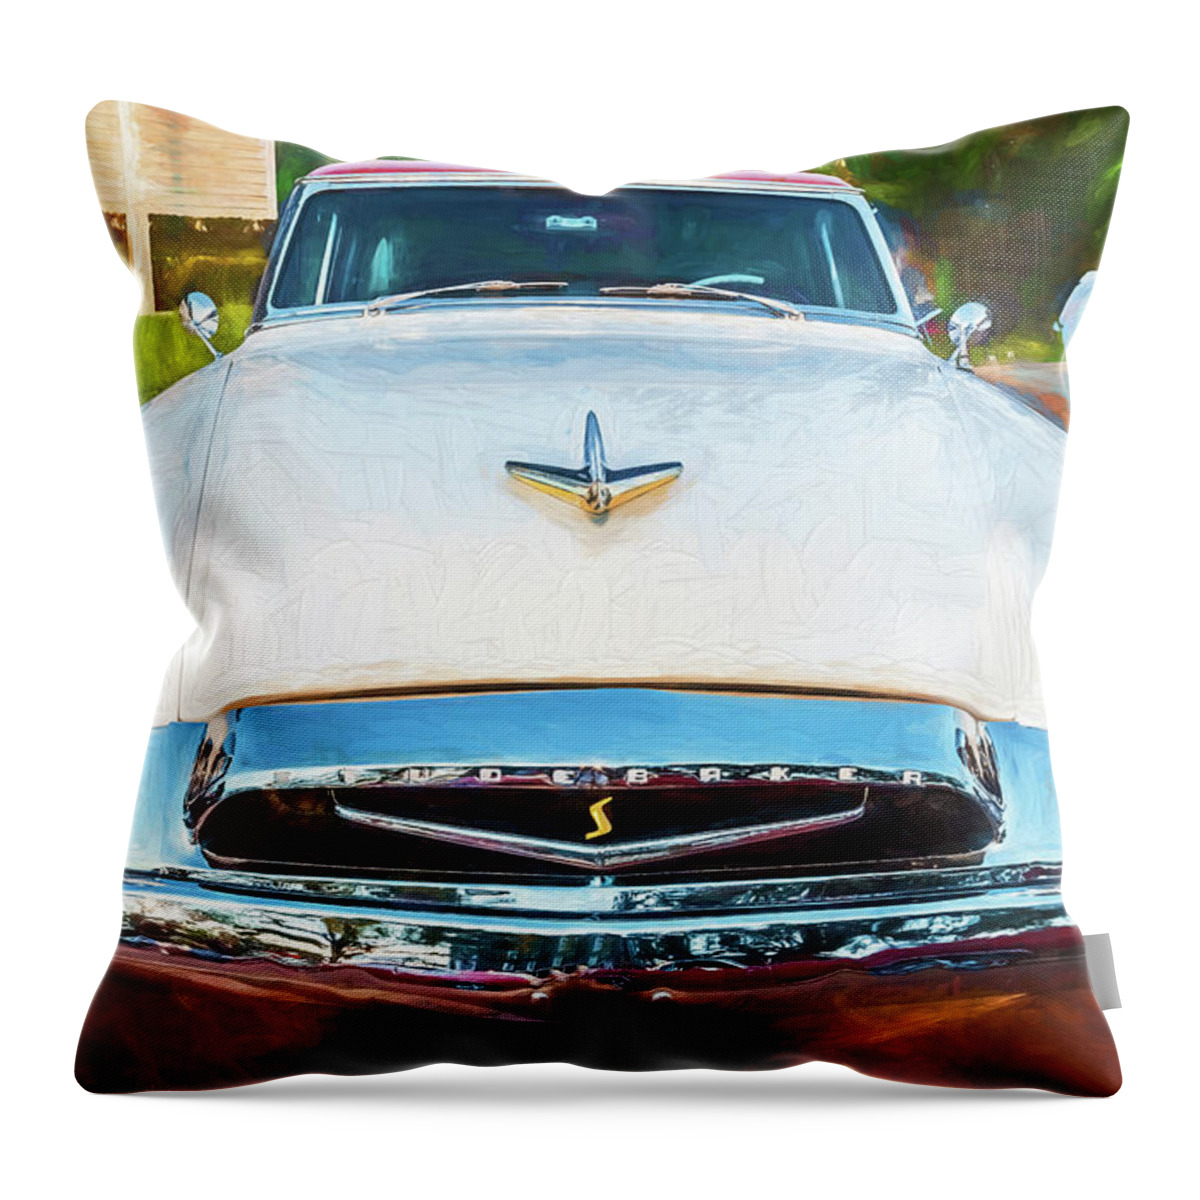 1955 Studebaker Throw Pillow featuring the photograph 1955 Studebaker President 111 by Rich Franco